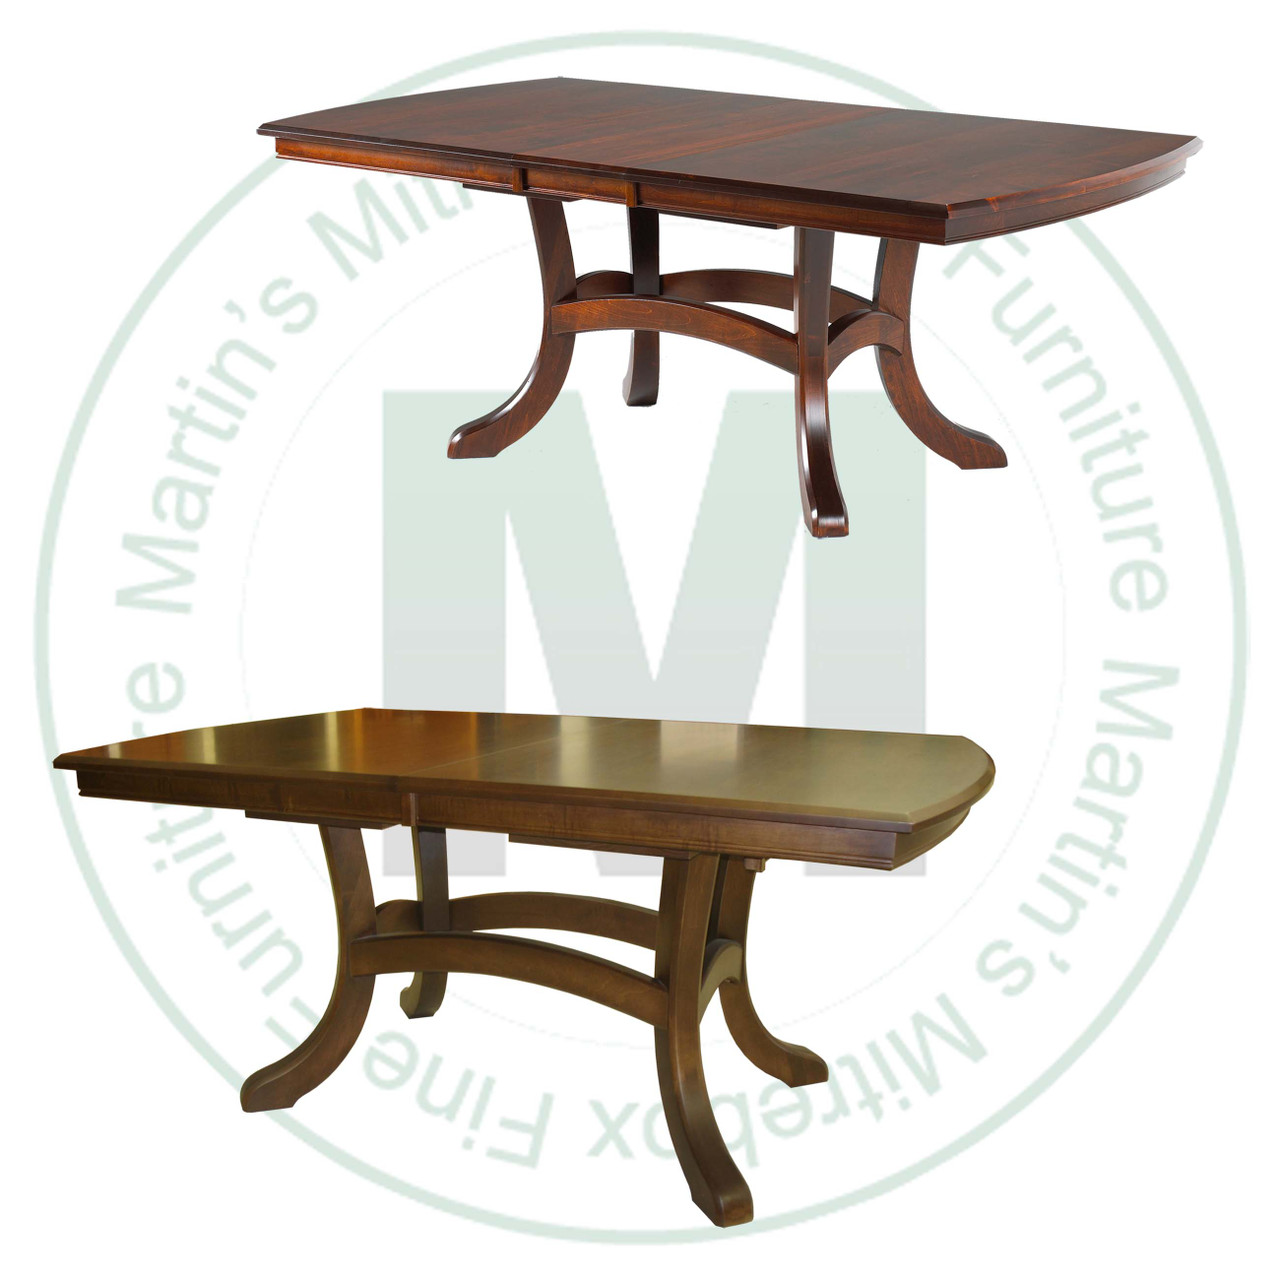 Maple Jordan Double Pedestal Table 48''D x 84''W x 30''H With 3 - 12'' Leaves. Table Has 1'' Thick Top